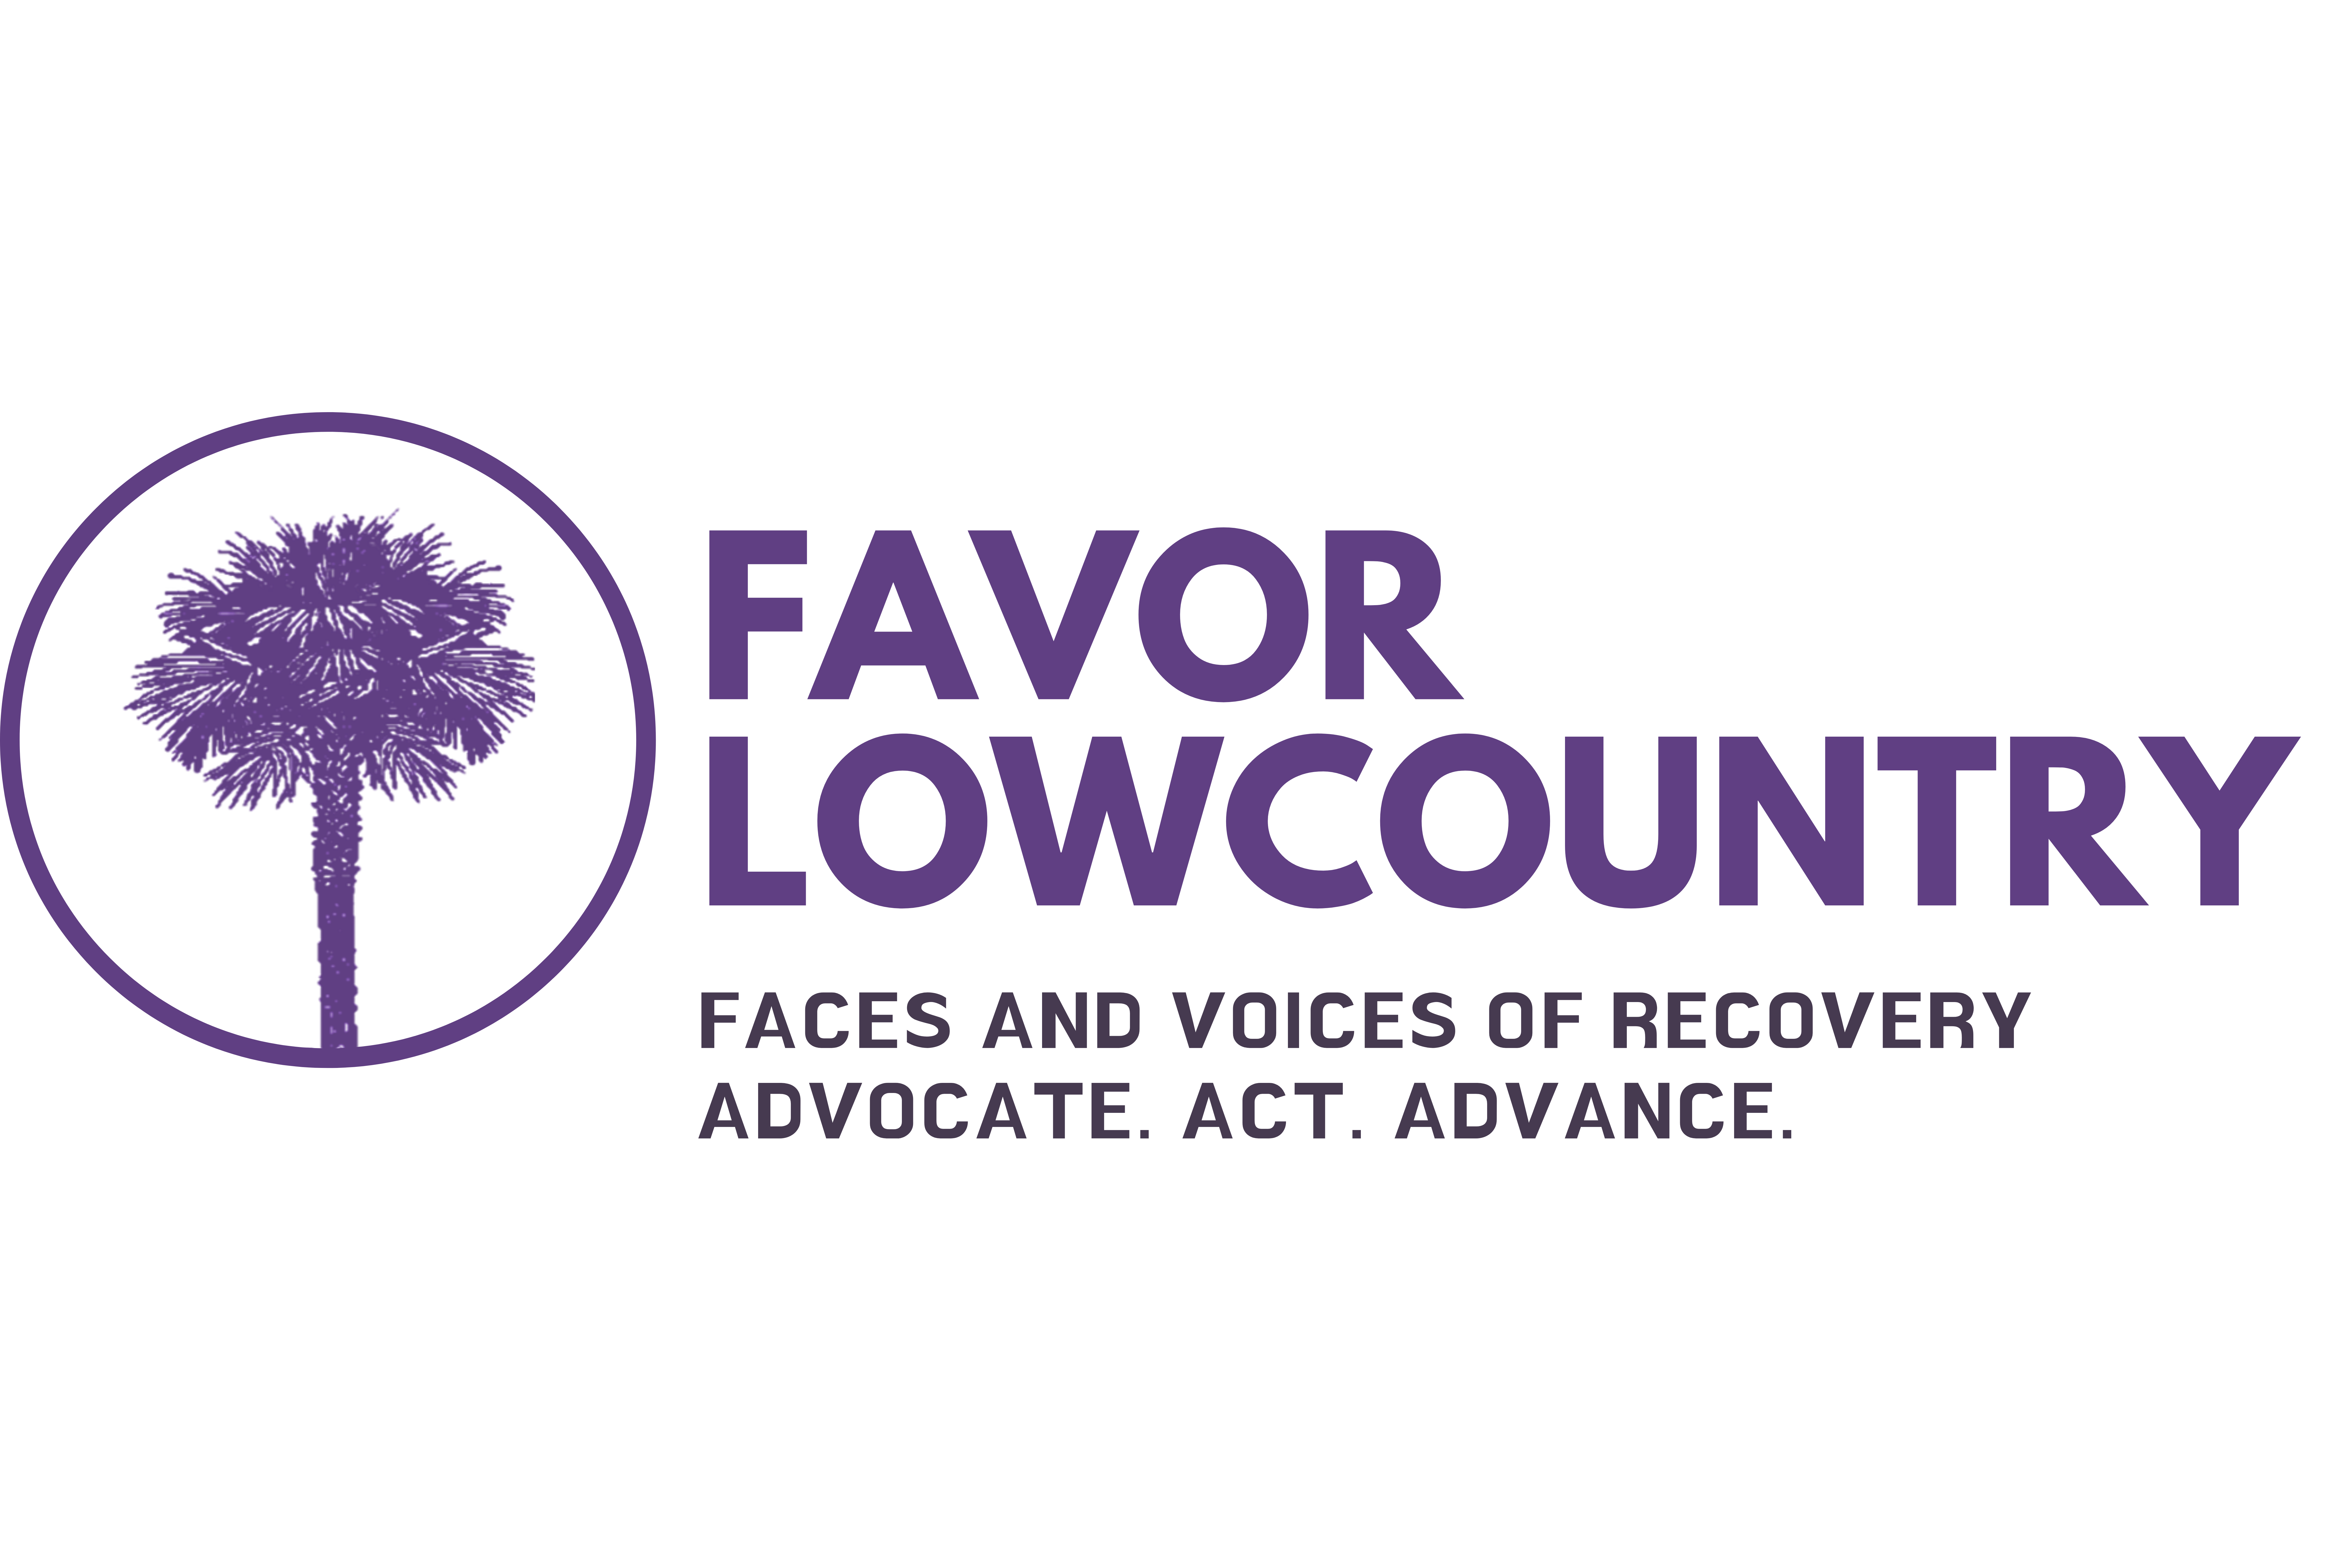 Favor Lowcountry